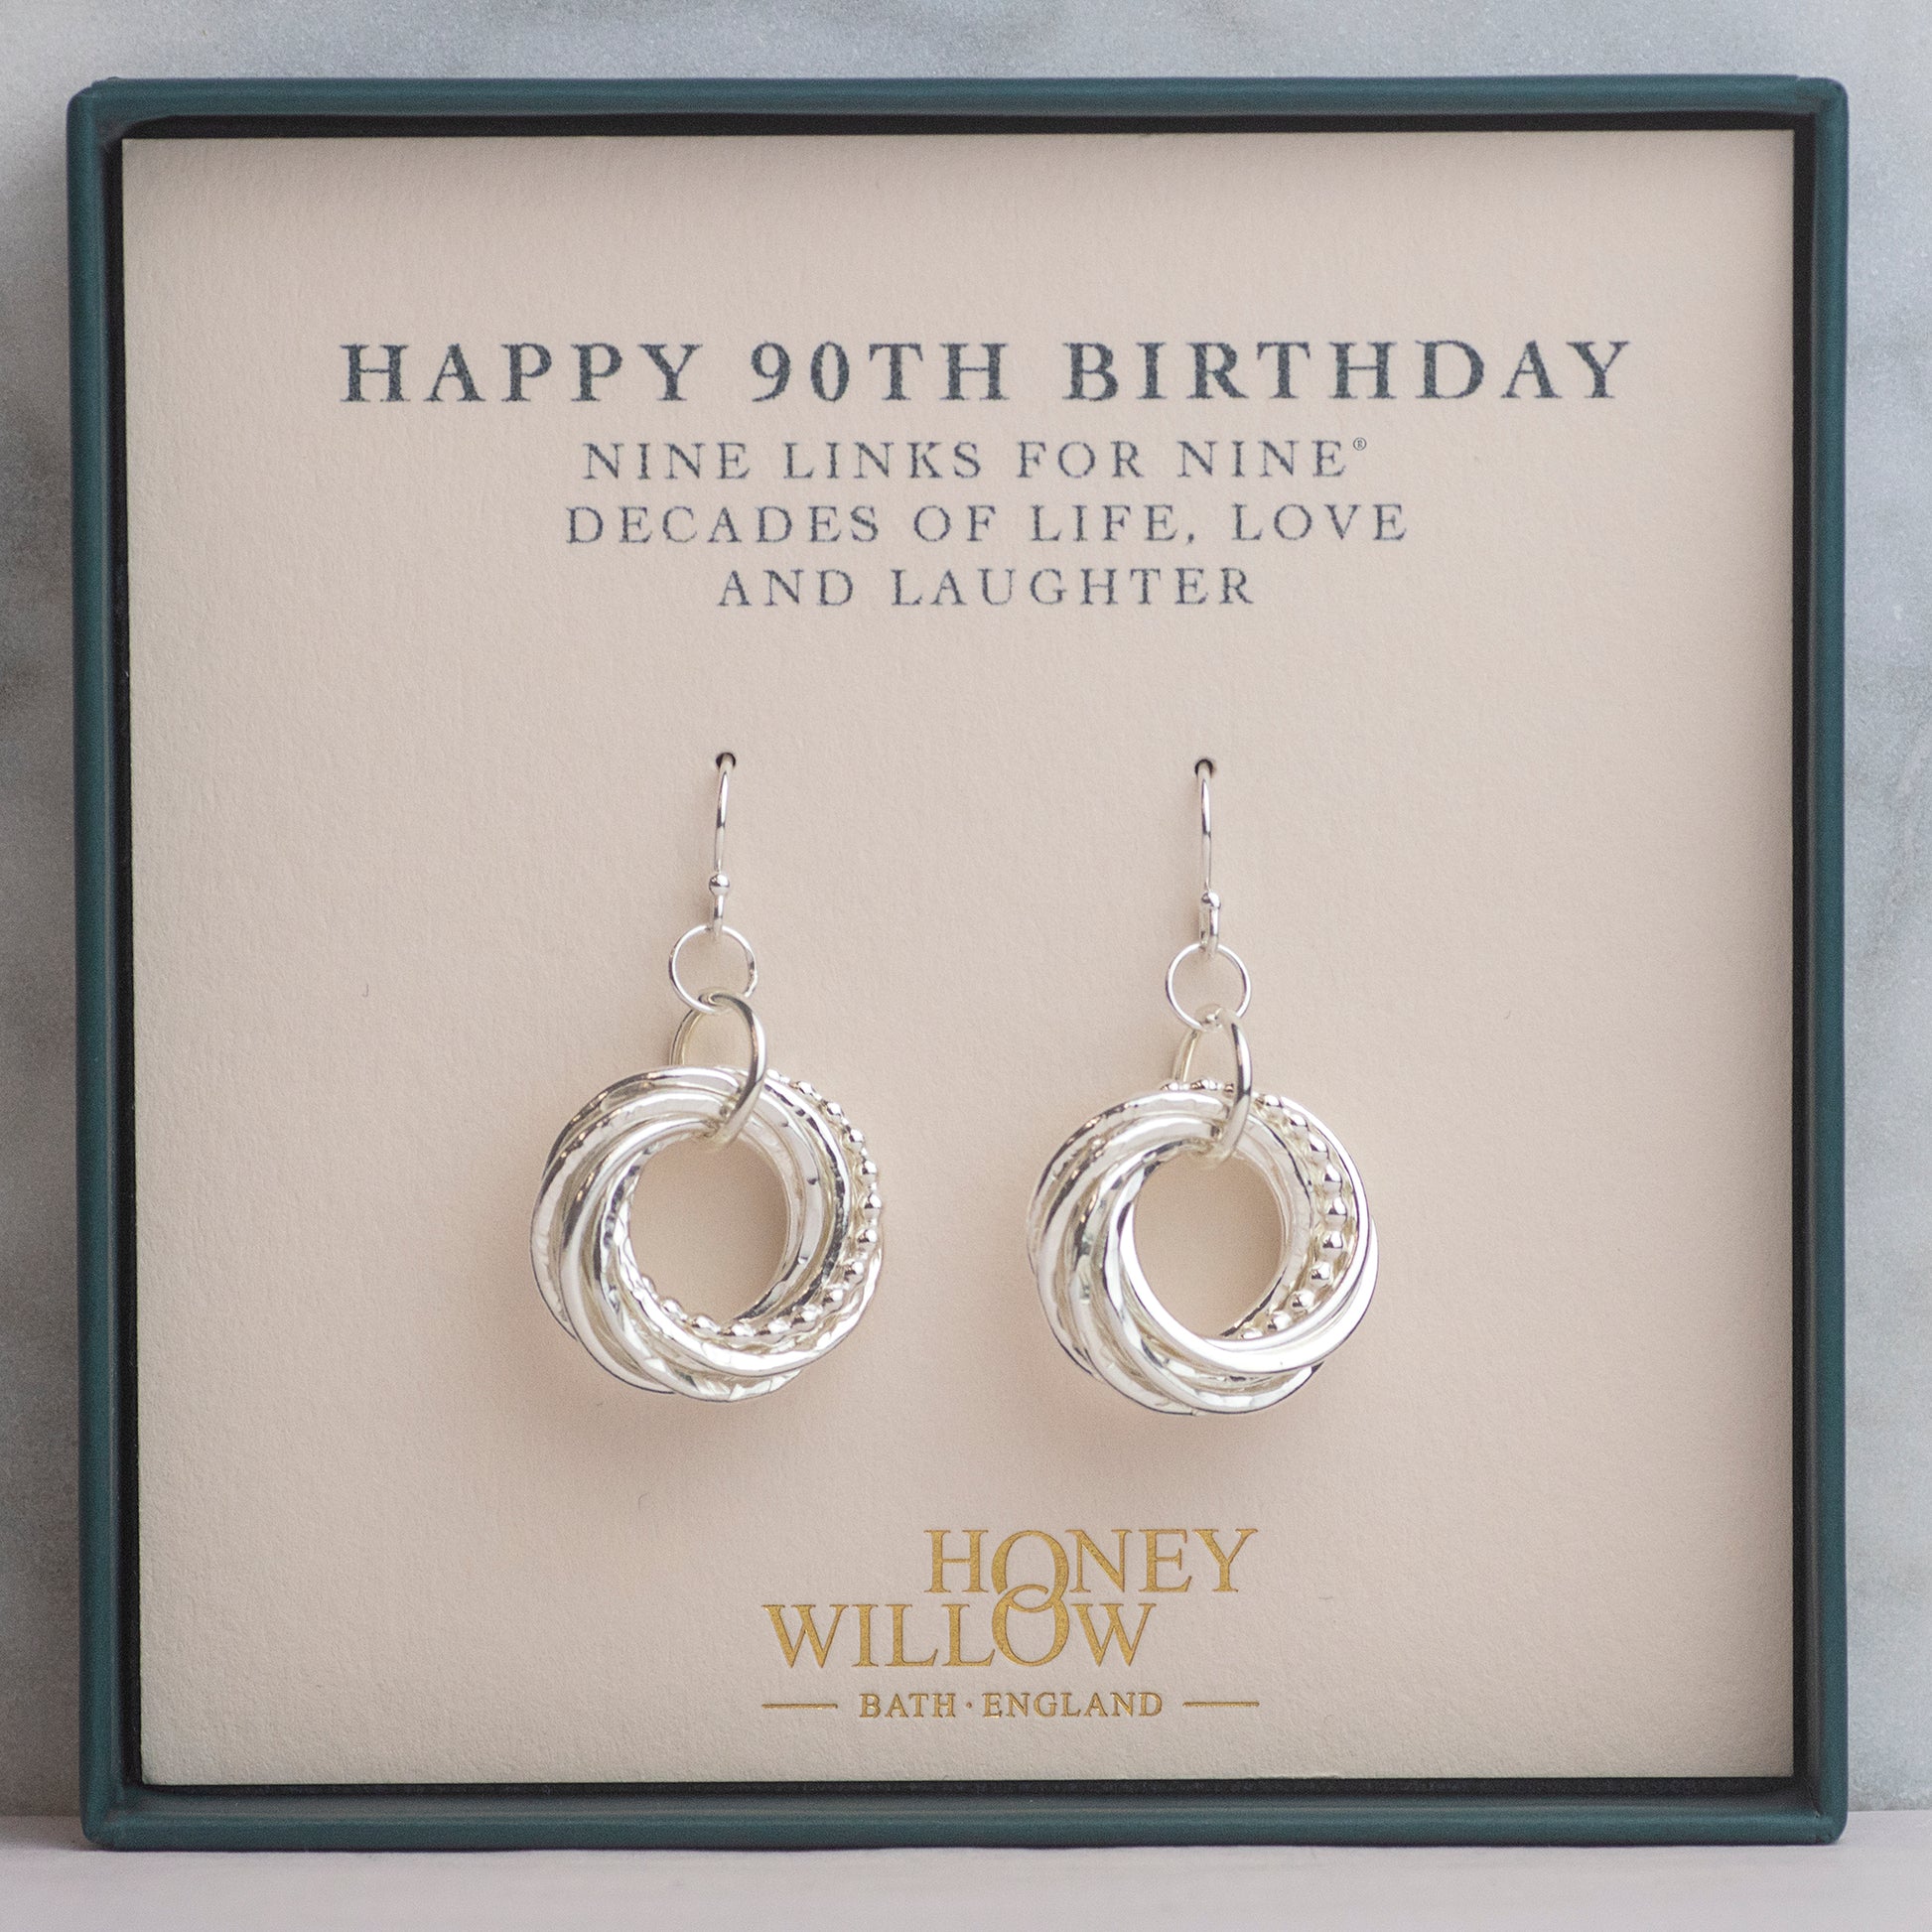 90th Birthday Earrings - Petite Silver - 9 Links for 9 Decades Earrings